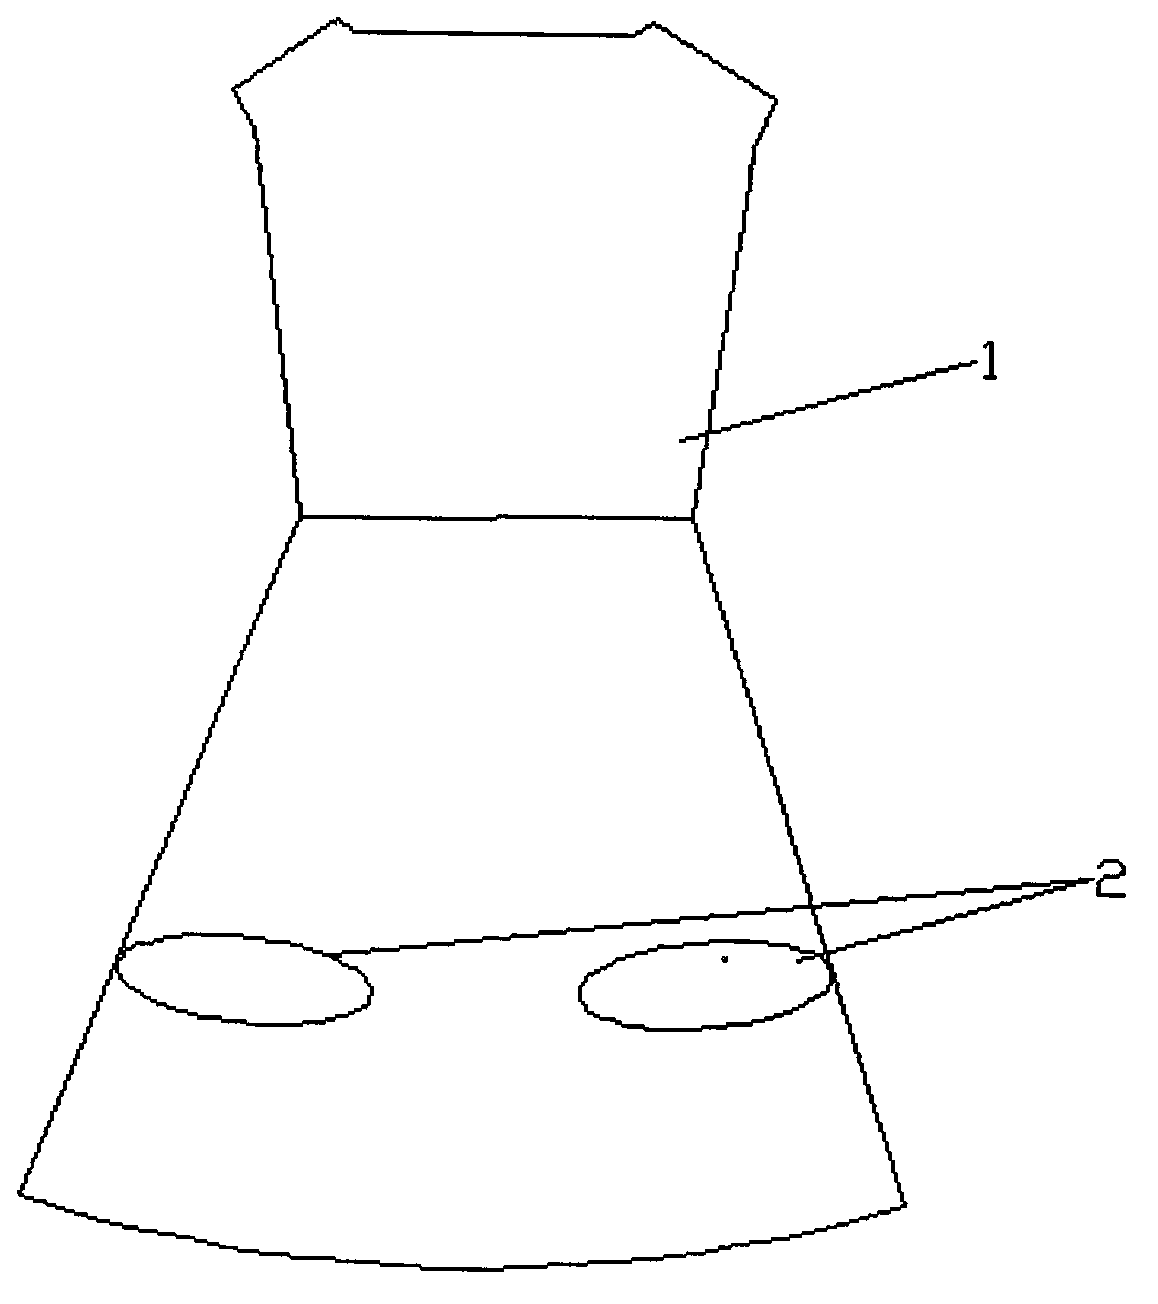 Anti-blowing weaving and knitting composite skirt